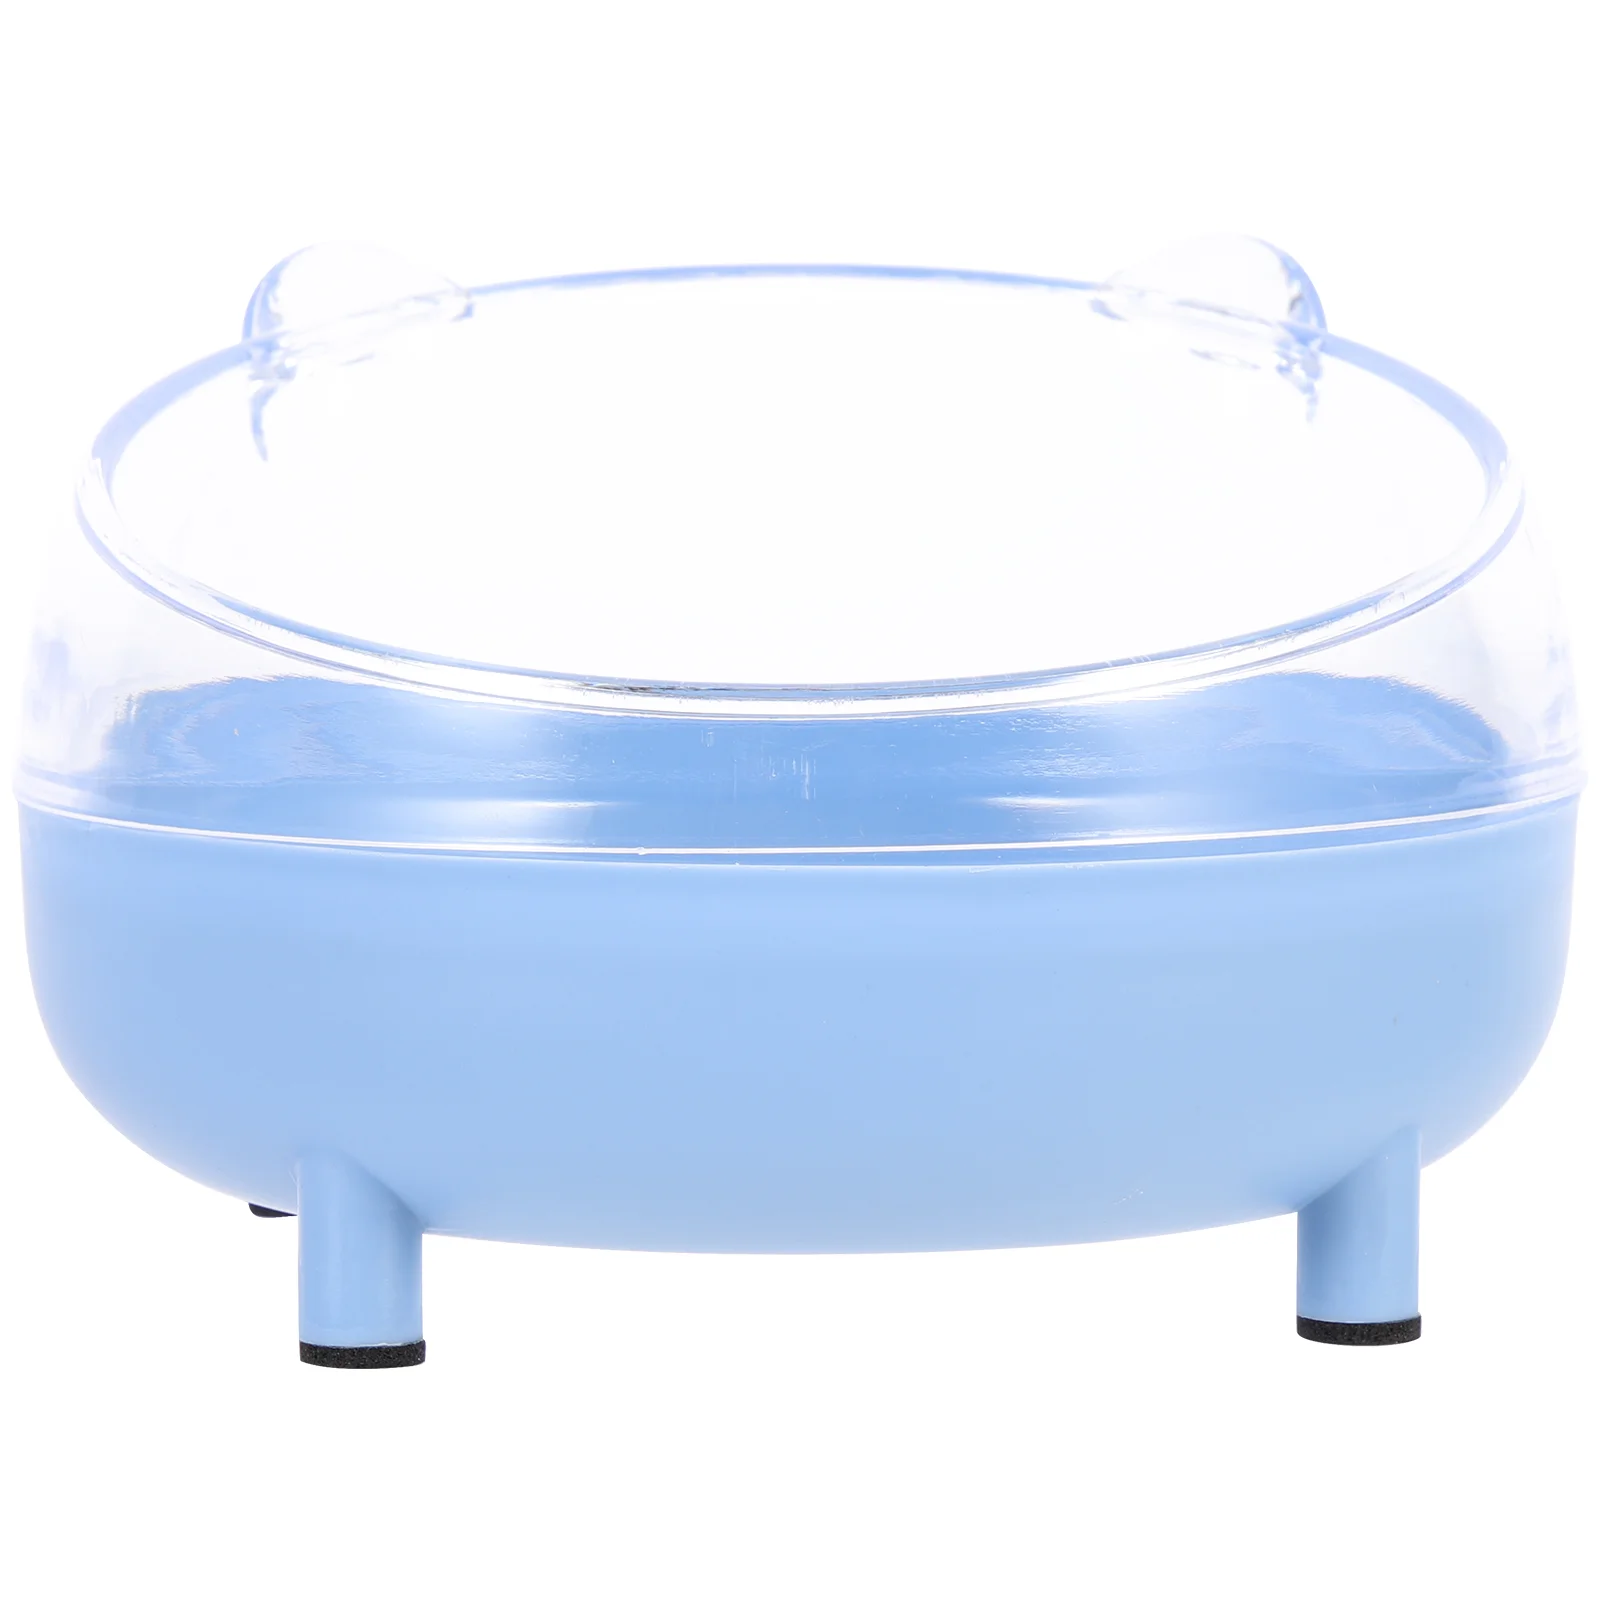 

Hamster Bathtub Bath Sand Box Bathroom Chinchilla Cage Daily Use Reusable Compact Delicate Household Resistant Wear Clear Toilet